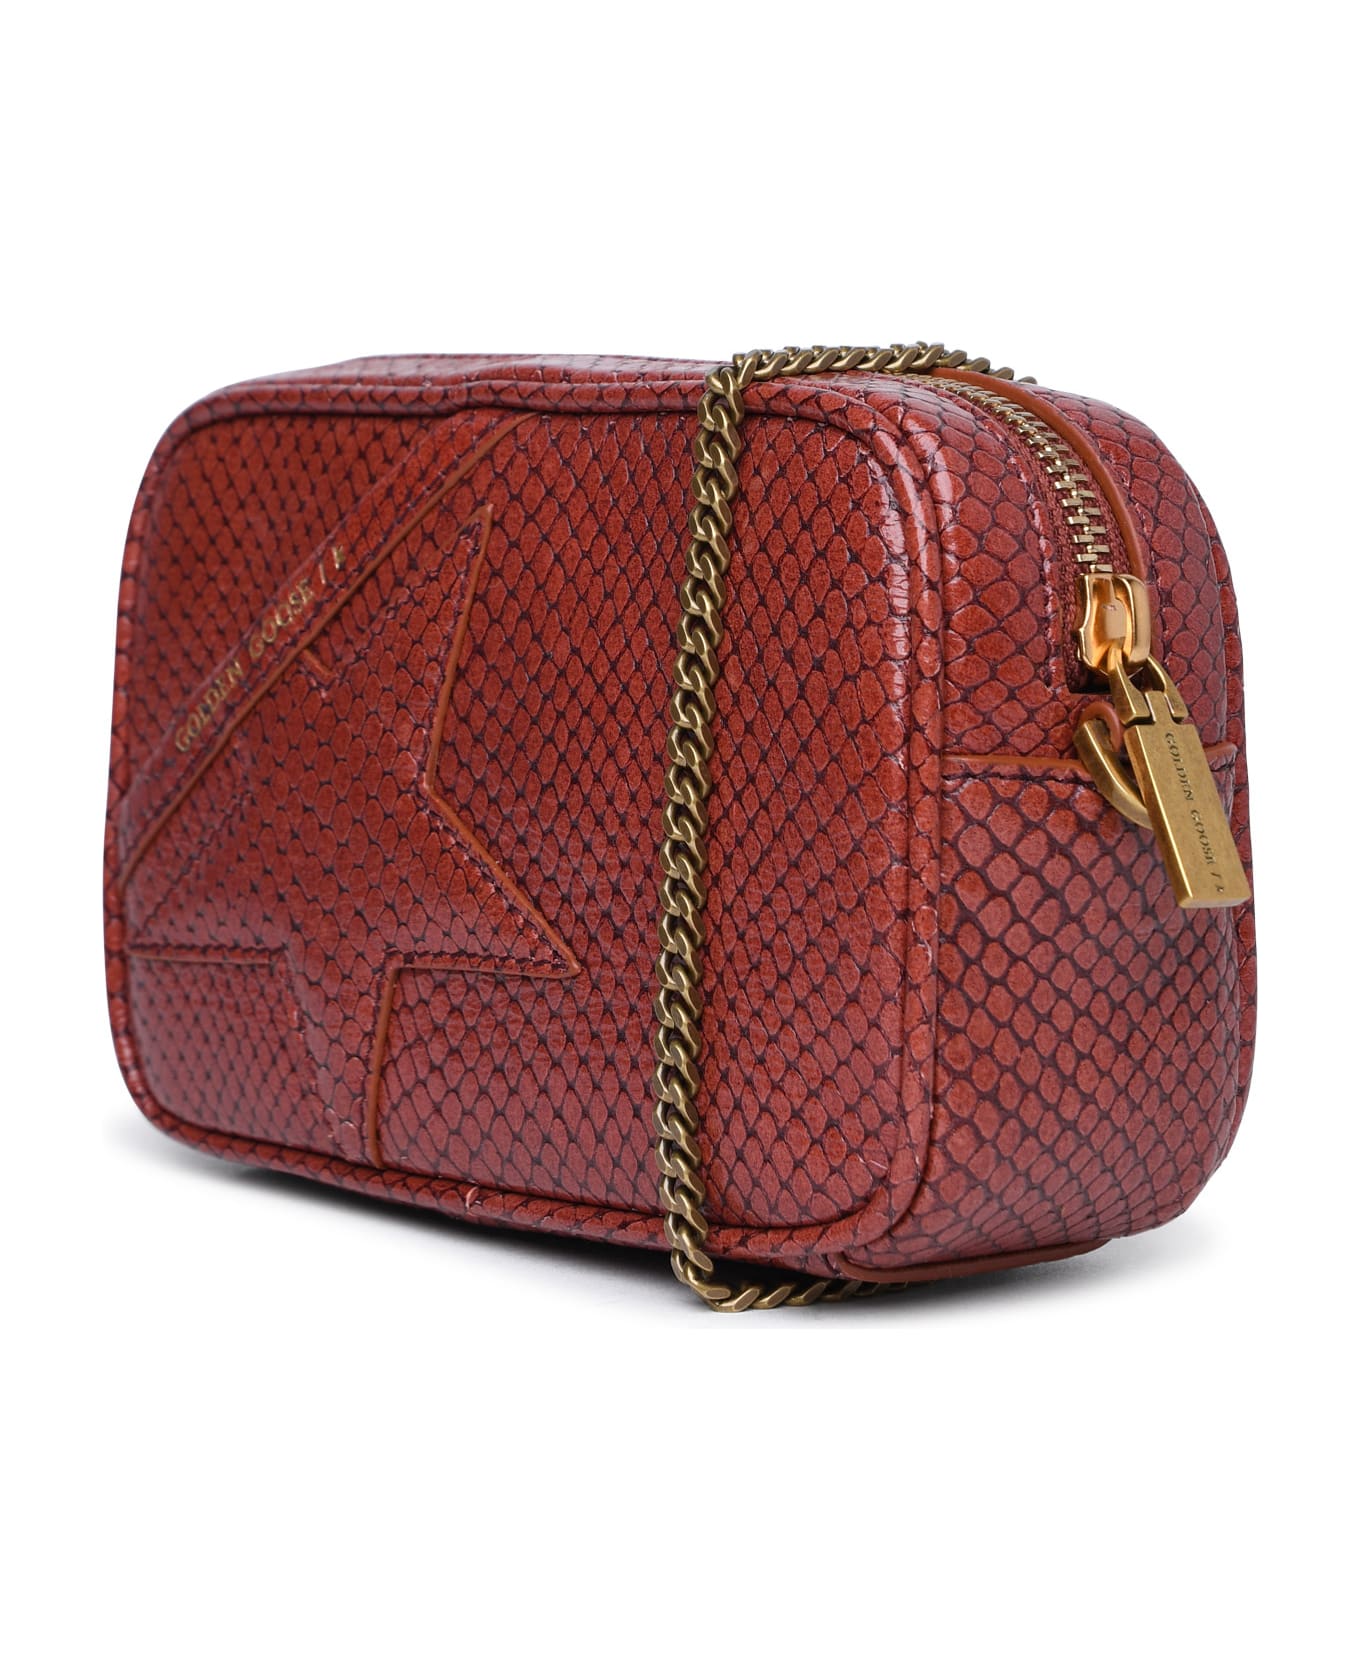 Golden Goose 'star' Mini Bag In Brown Leather - Red